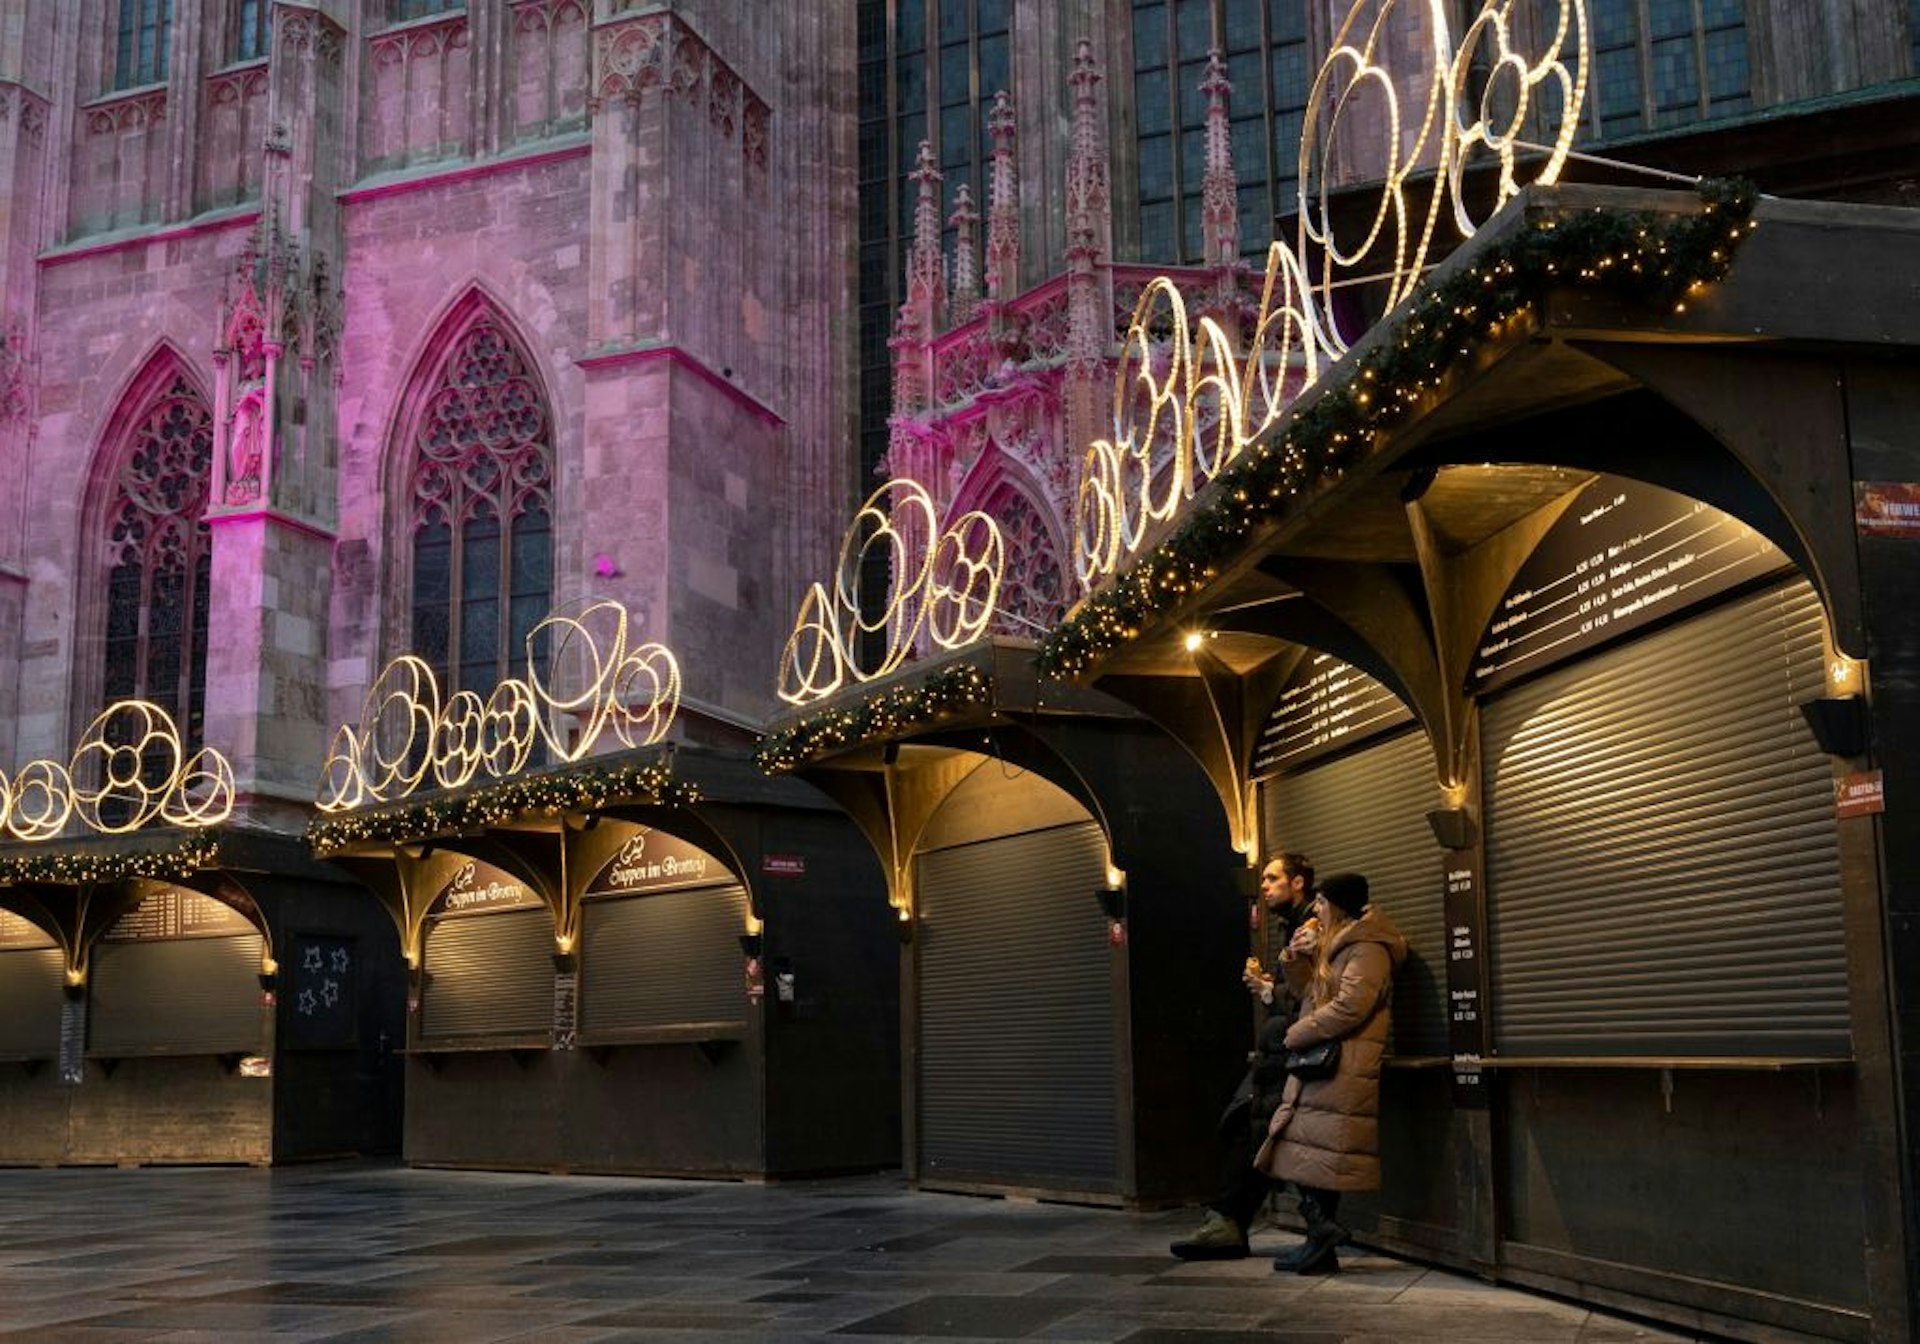 A couple eat a snack at the closed Christmas market next to Stephen's Cathedral in Vienna